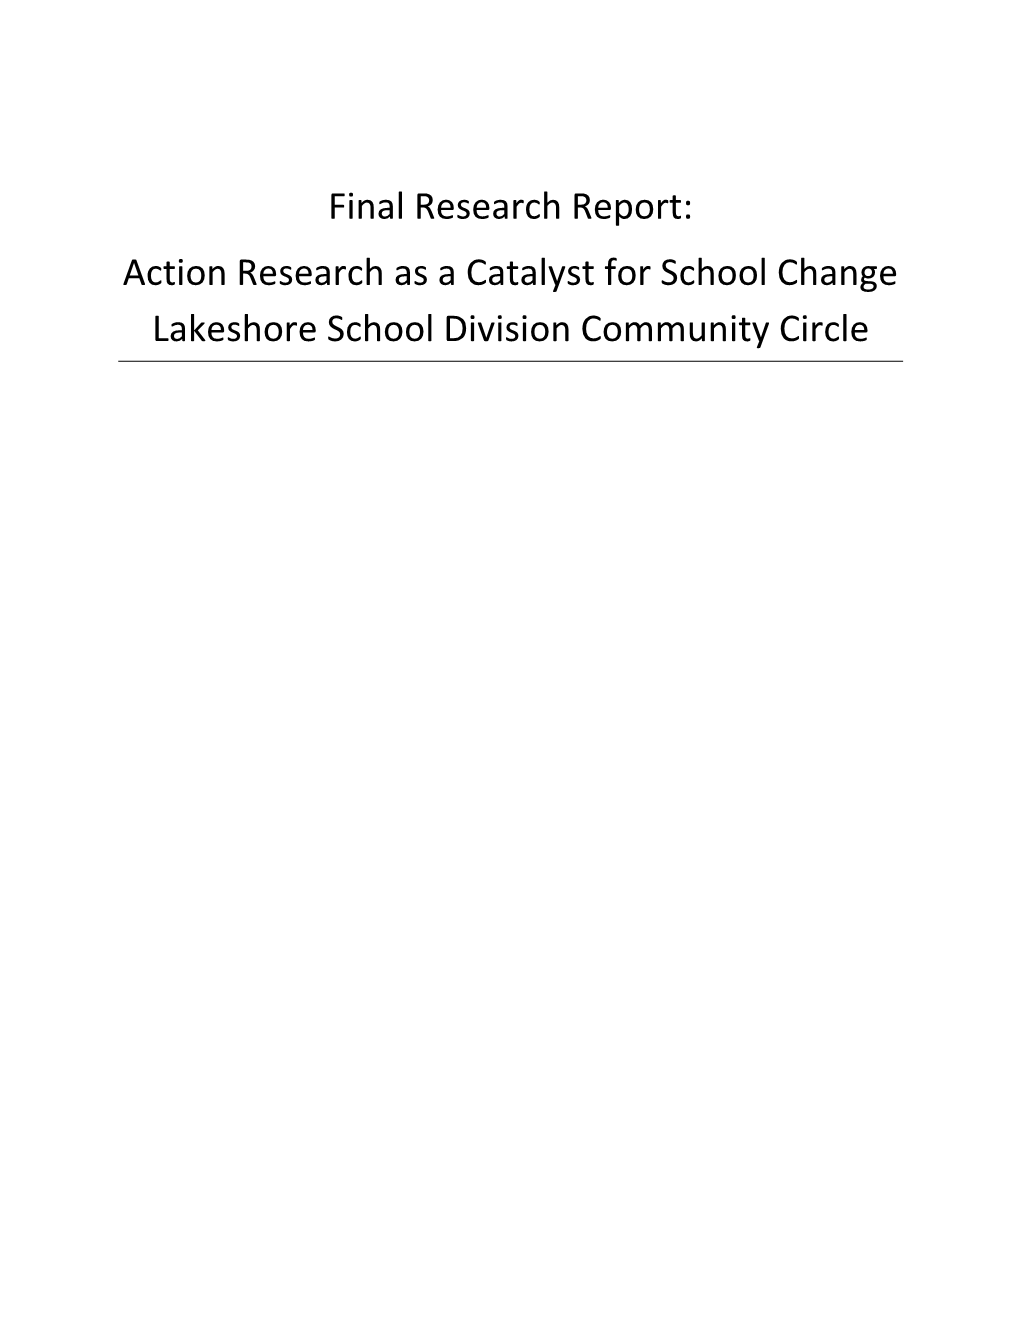 Final Research Report: Action Research As a Catalyst for School Change Lakeshore School Division Community Circle